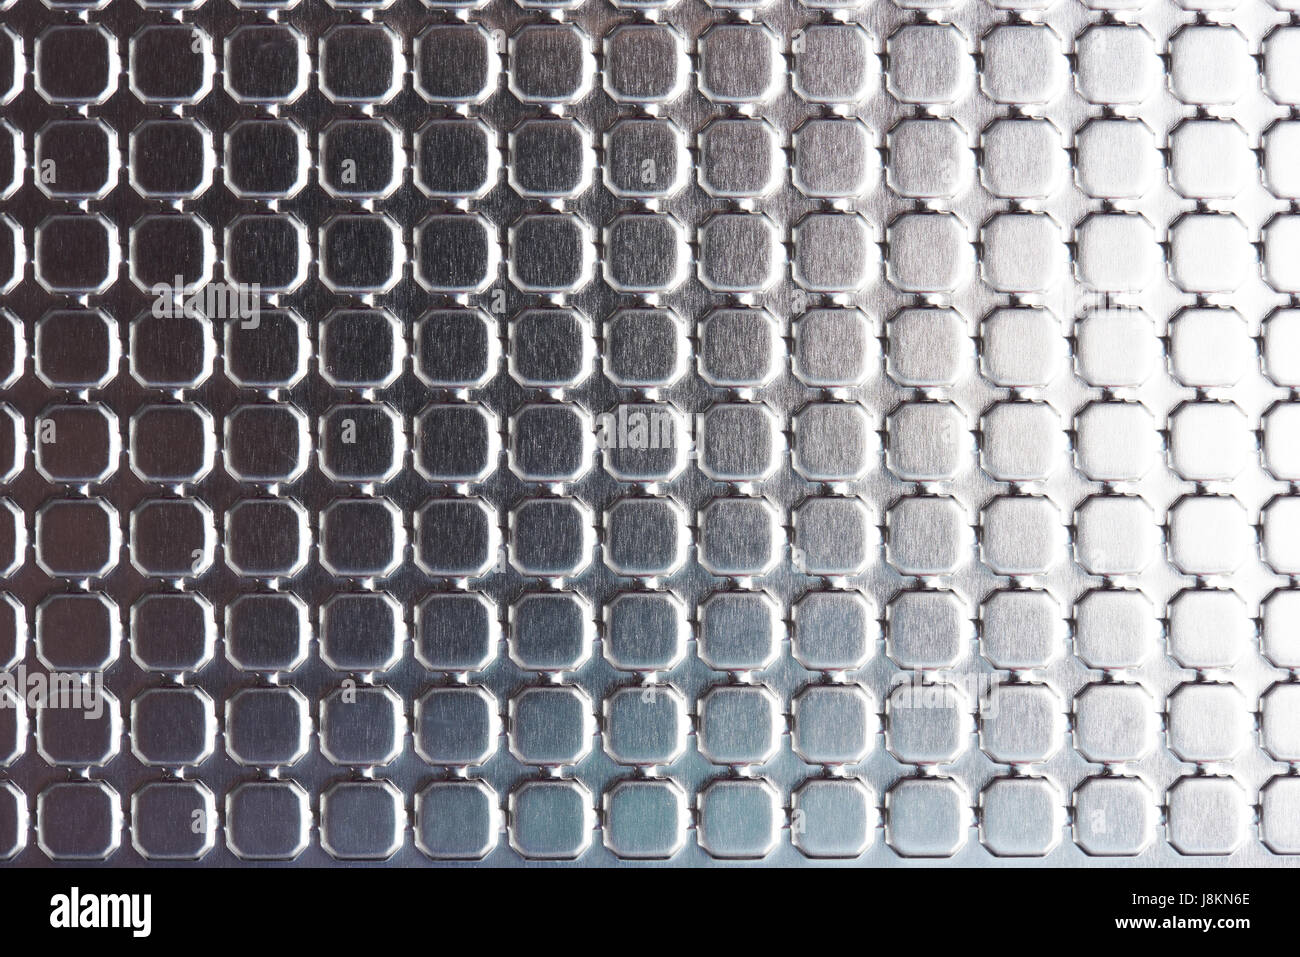 Squares on shiny metal surface close-up. Tiles on metallic surface Stock Photo